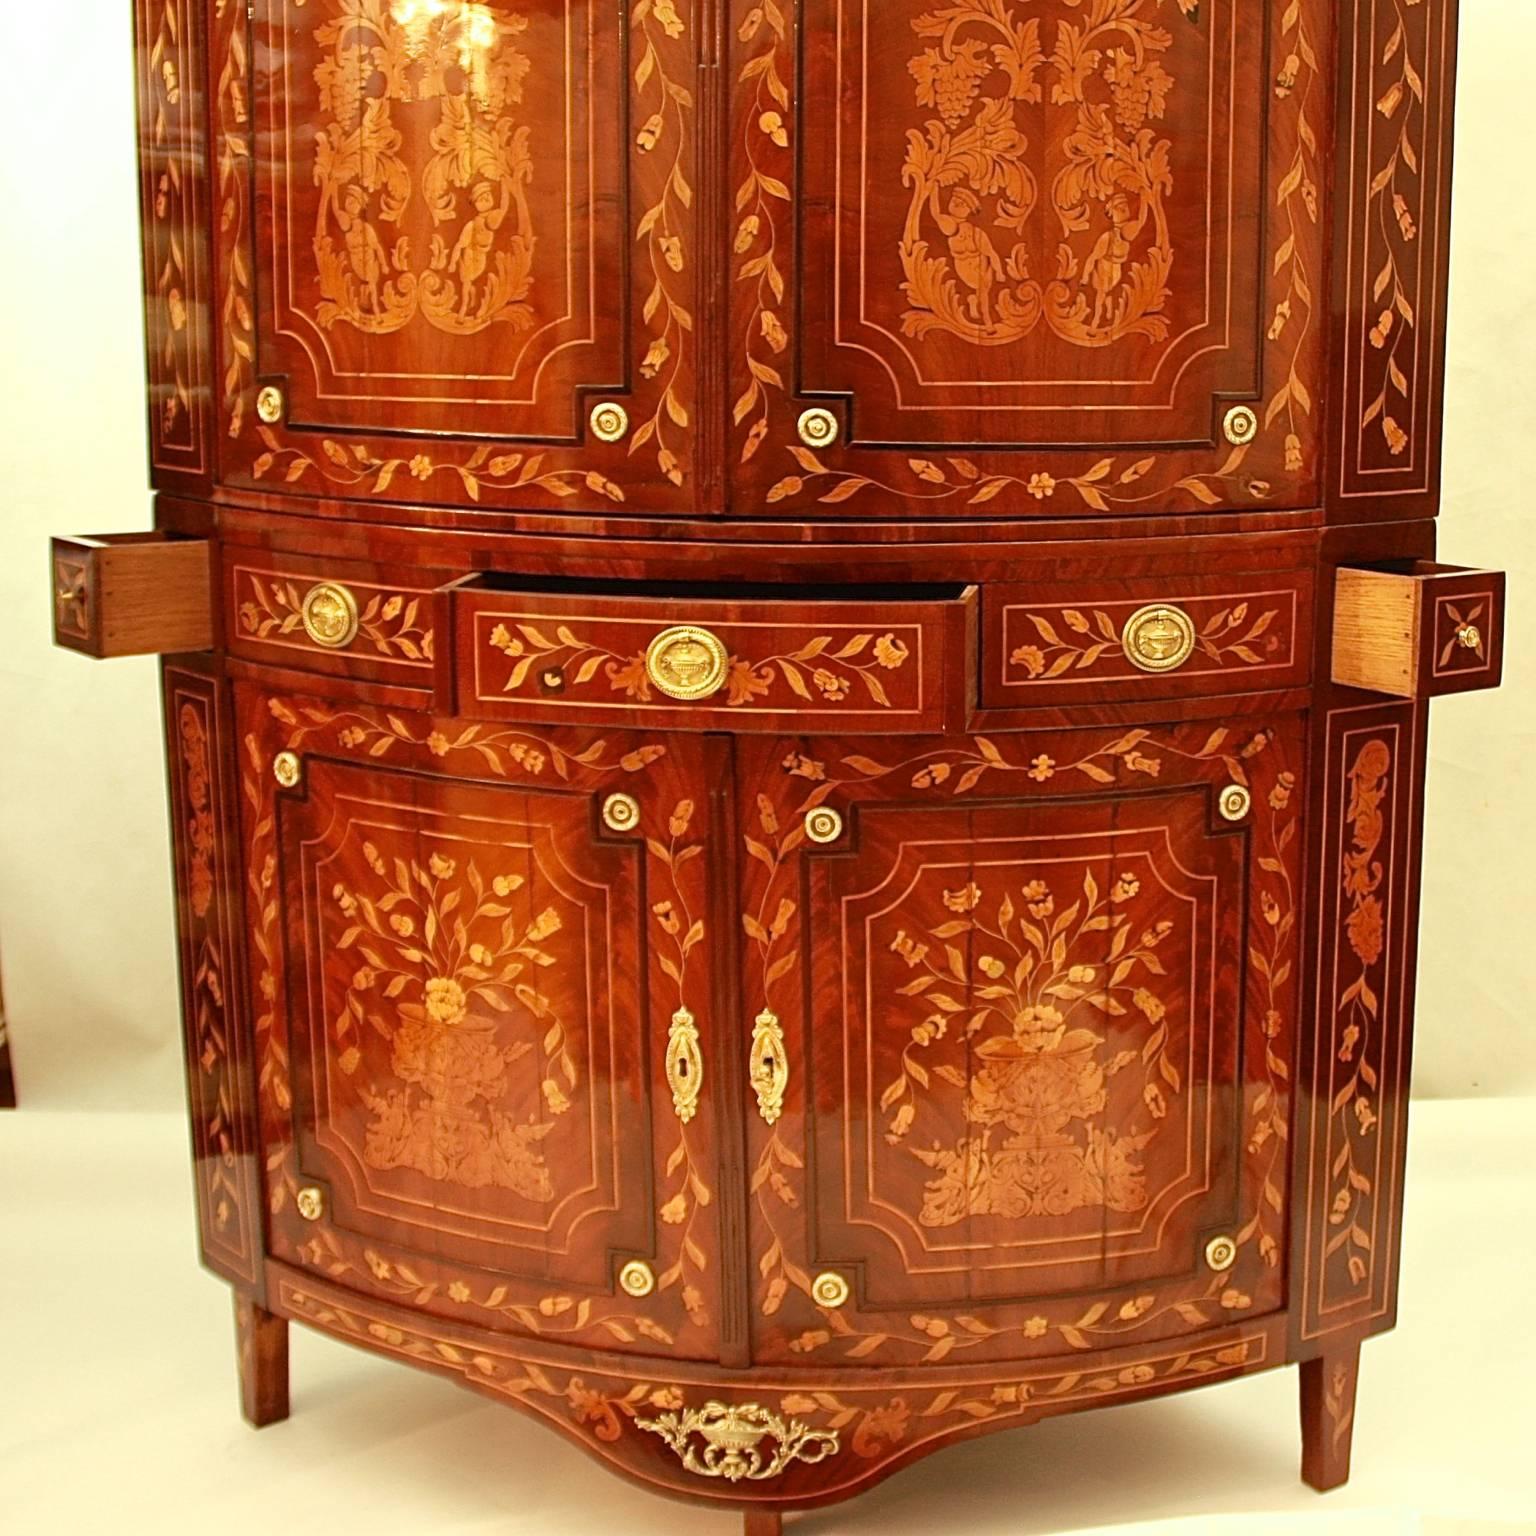 Gilt Large Neoclassical Flower Marquetry Bowfront Corner Cupboard